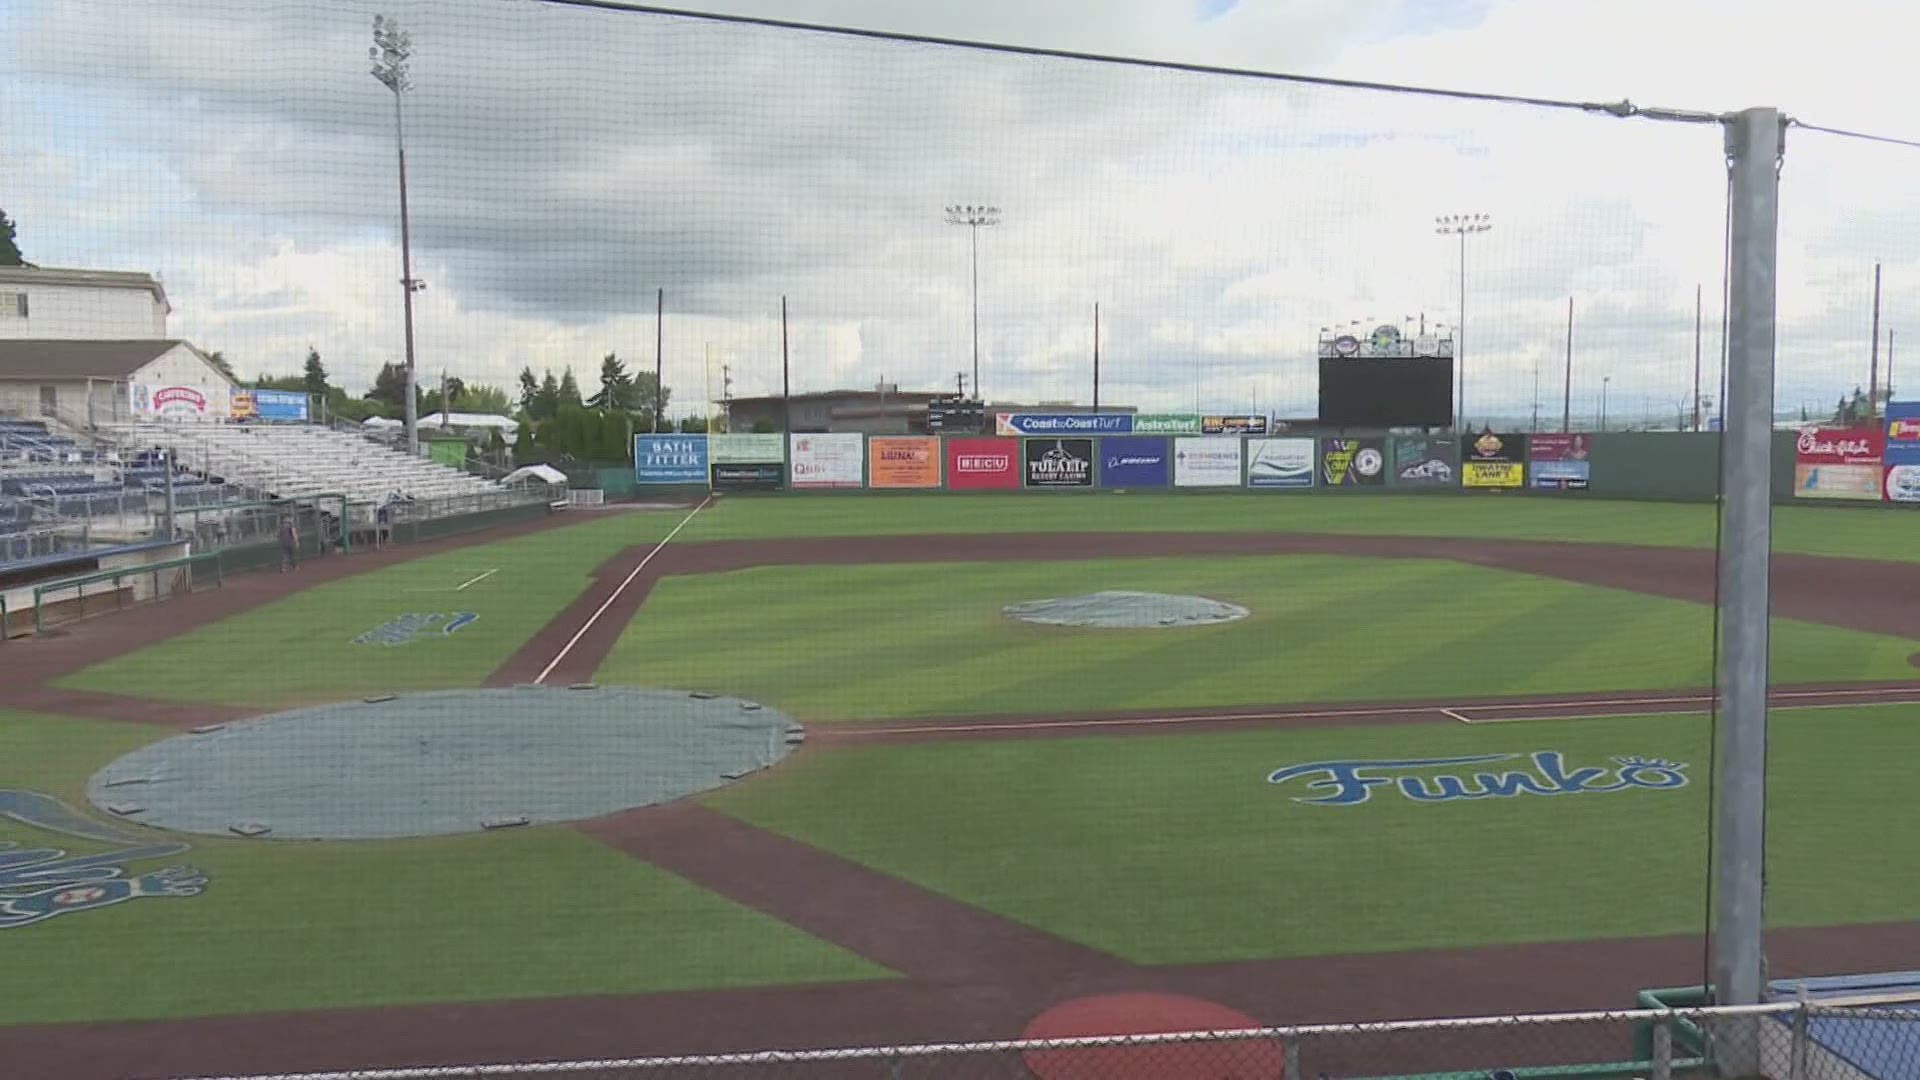 The seats sat empty all of 2020 for the Tacoma Rainiers and the Everett AquaSox after the season was canceled due to COVID-19 restrictions, but fans are back.